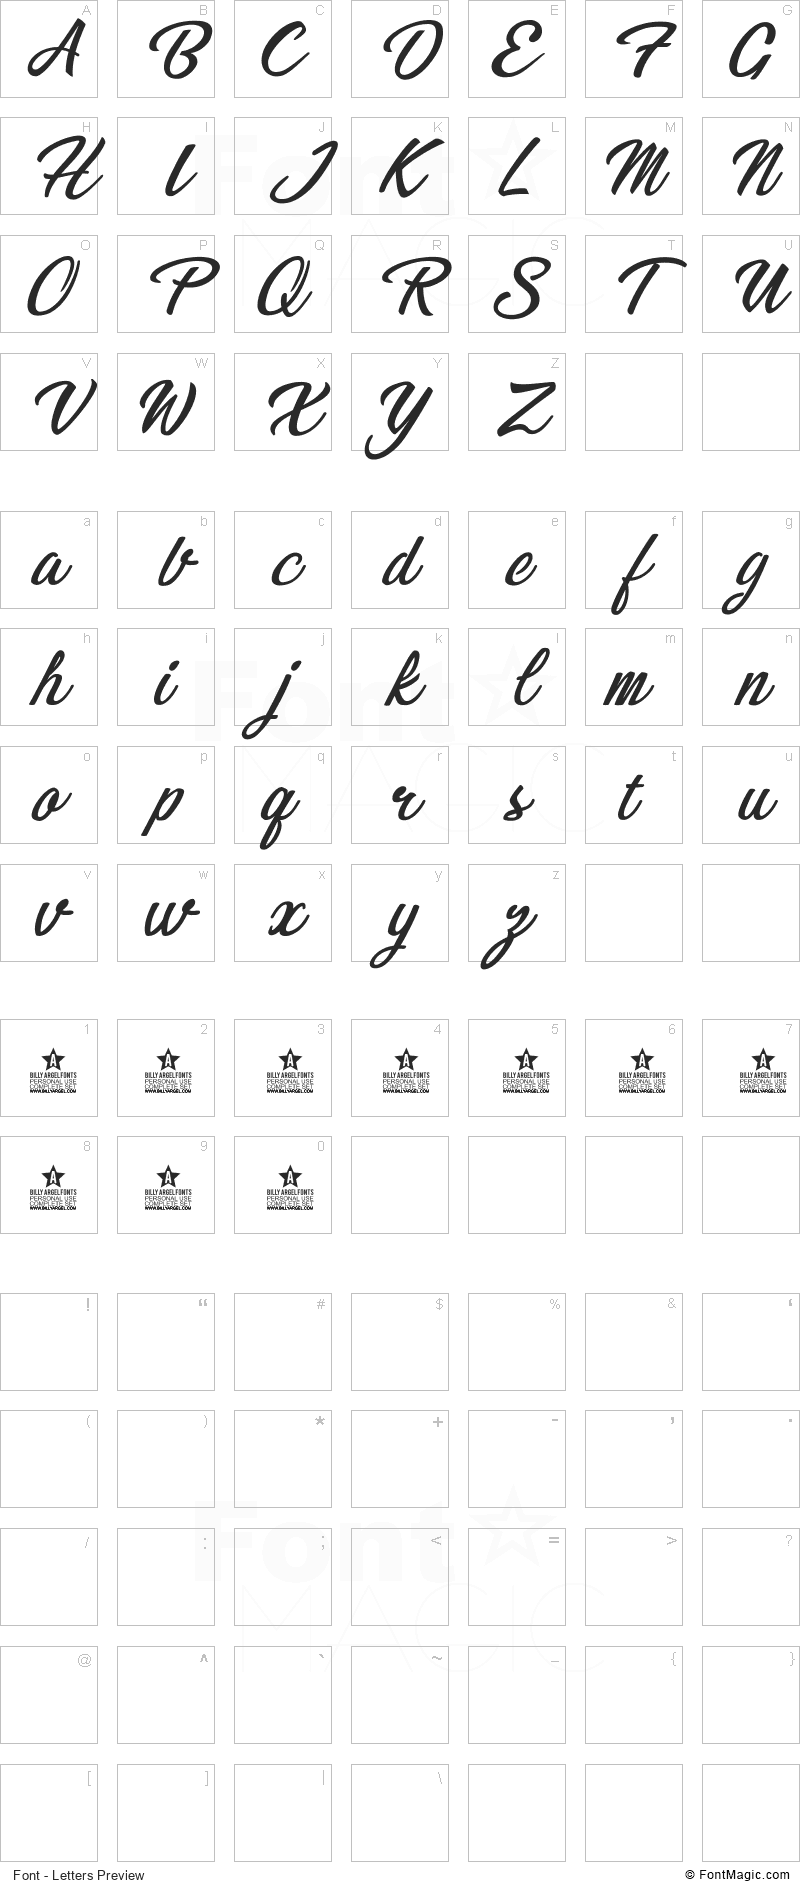 Bikinis Font - All Latters Preview Chart